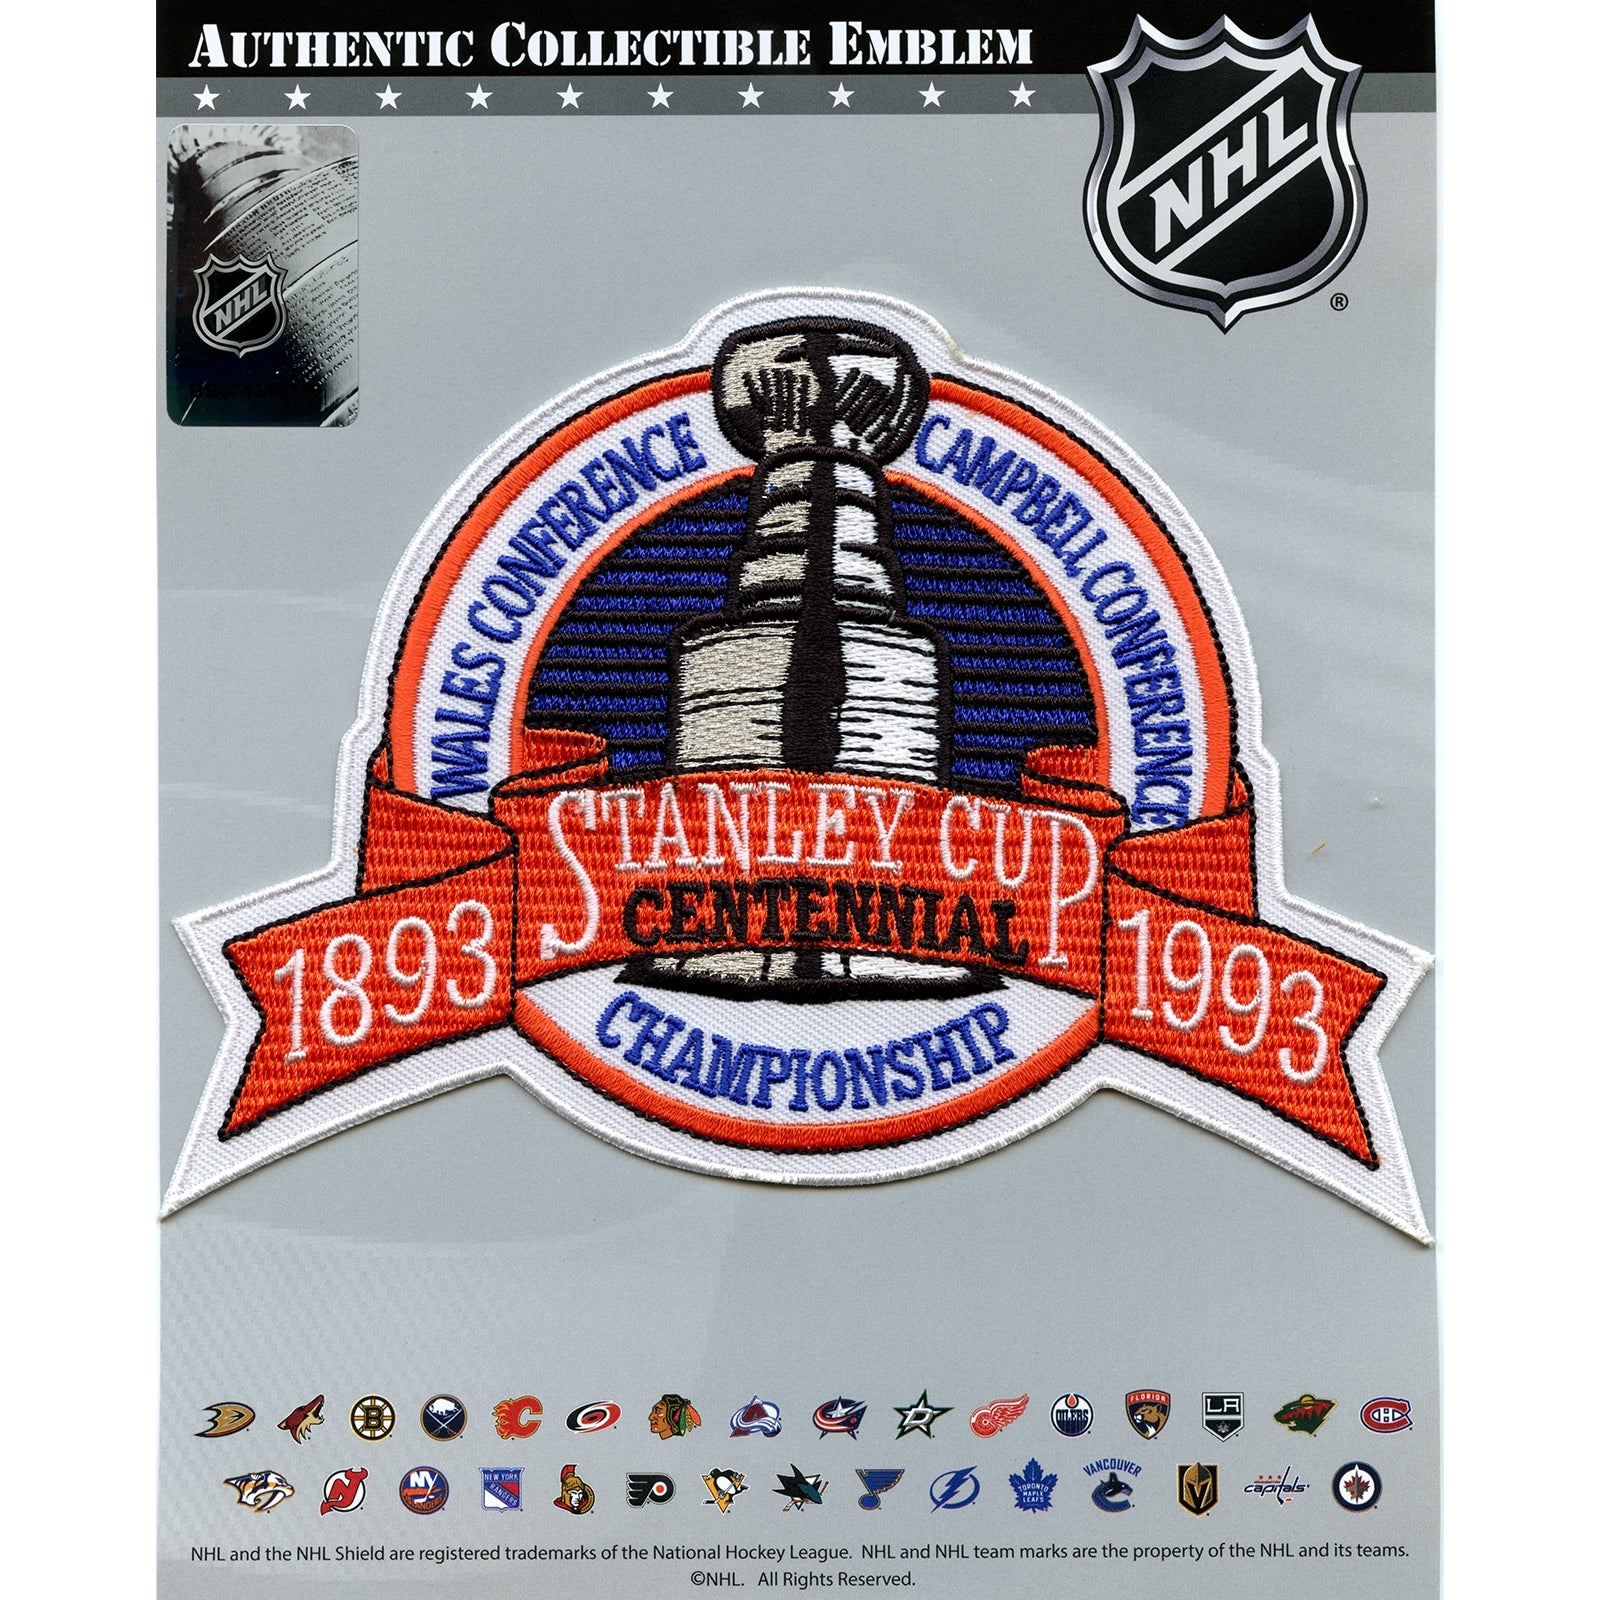 Let's talk about Stanley Cup Final jersey patch locations - The